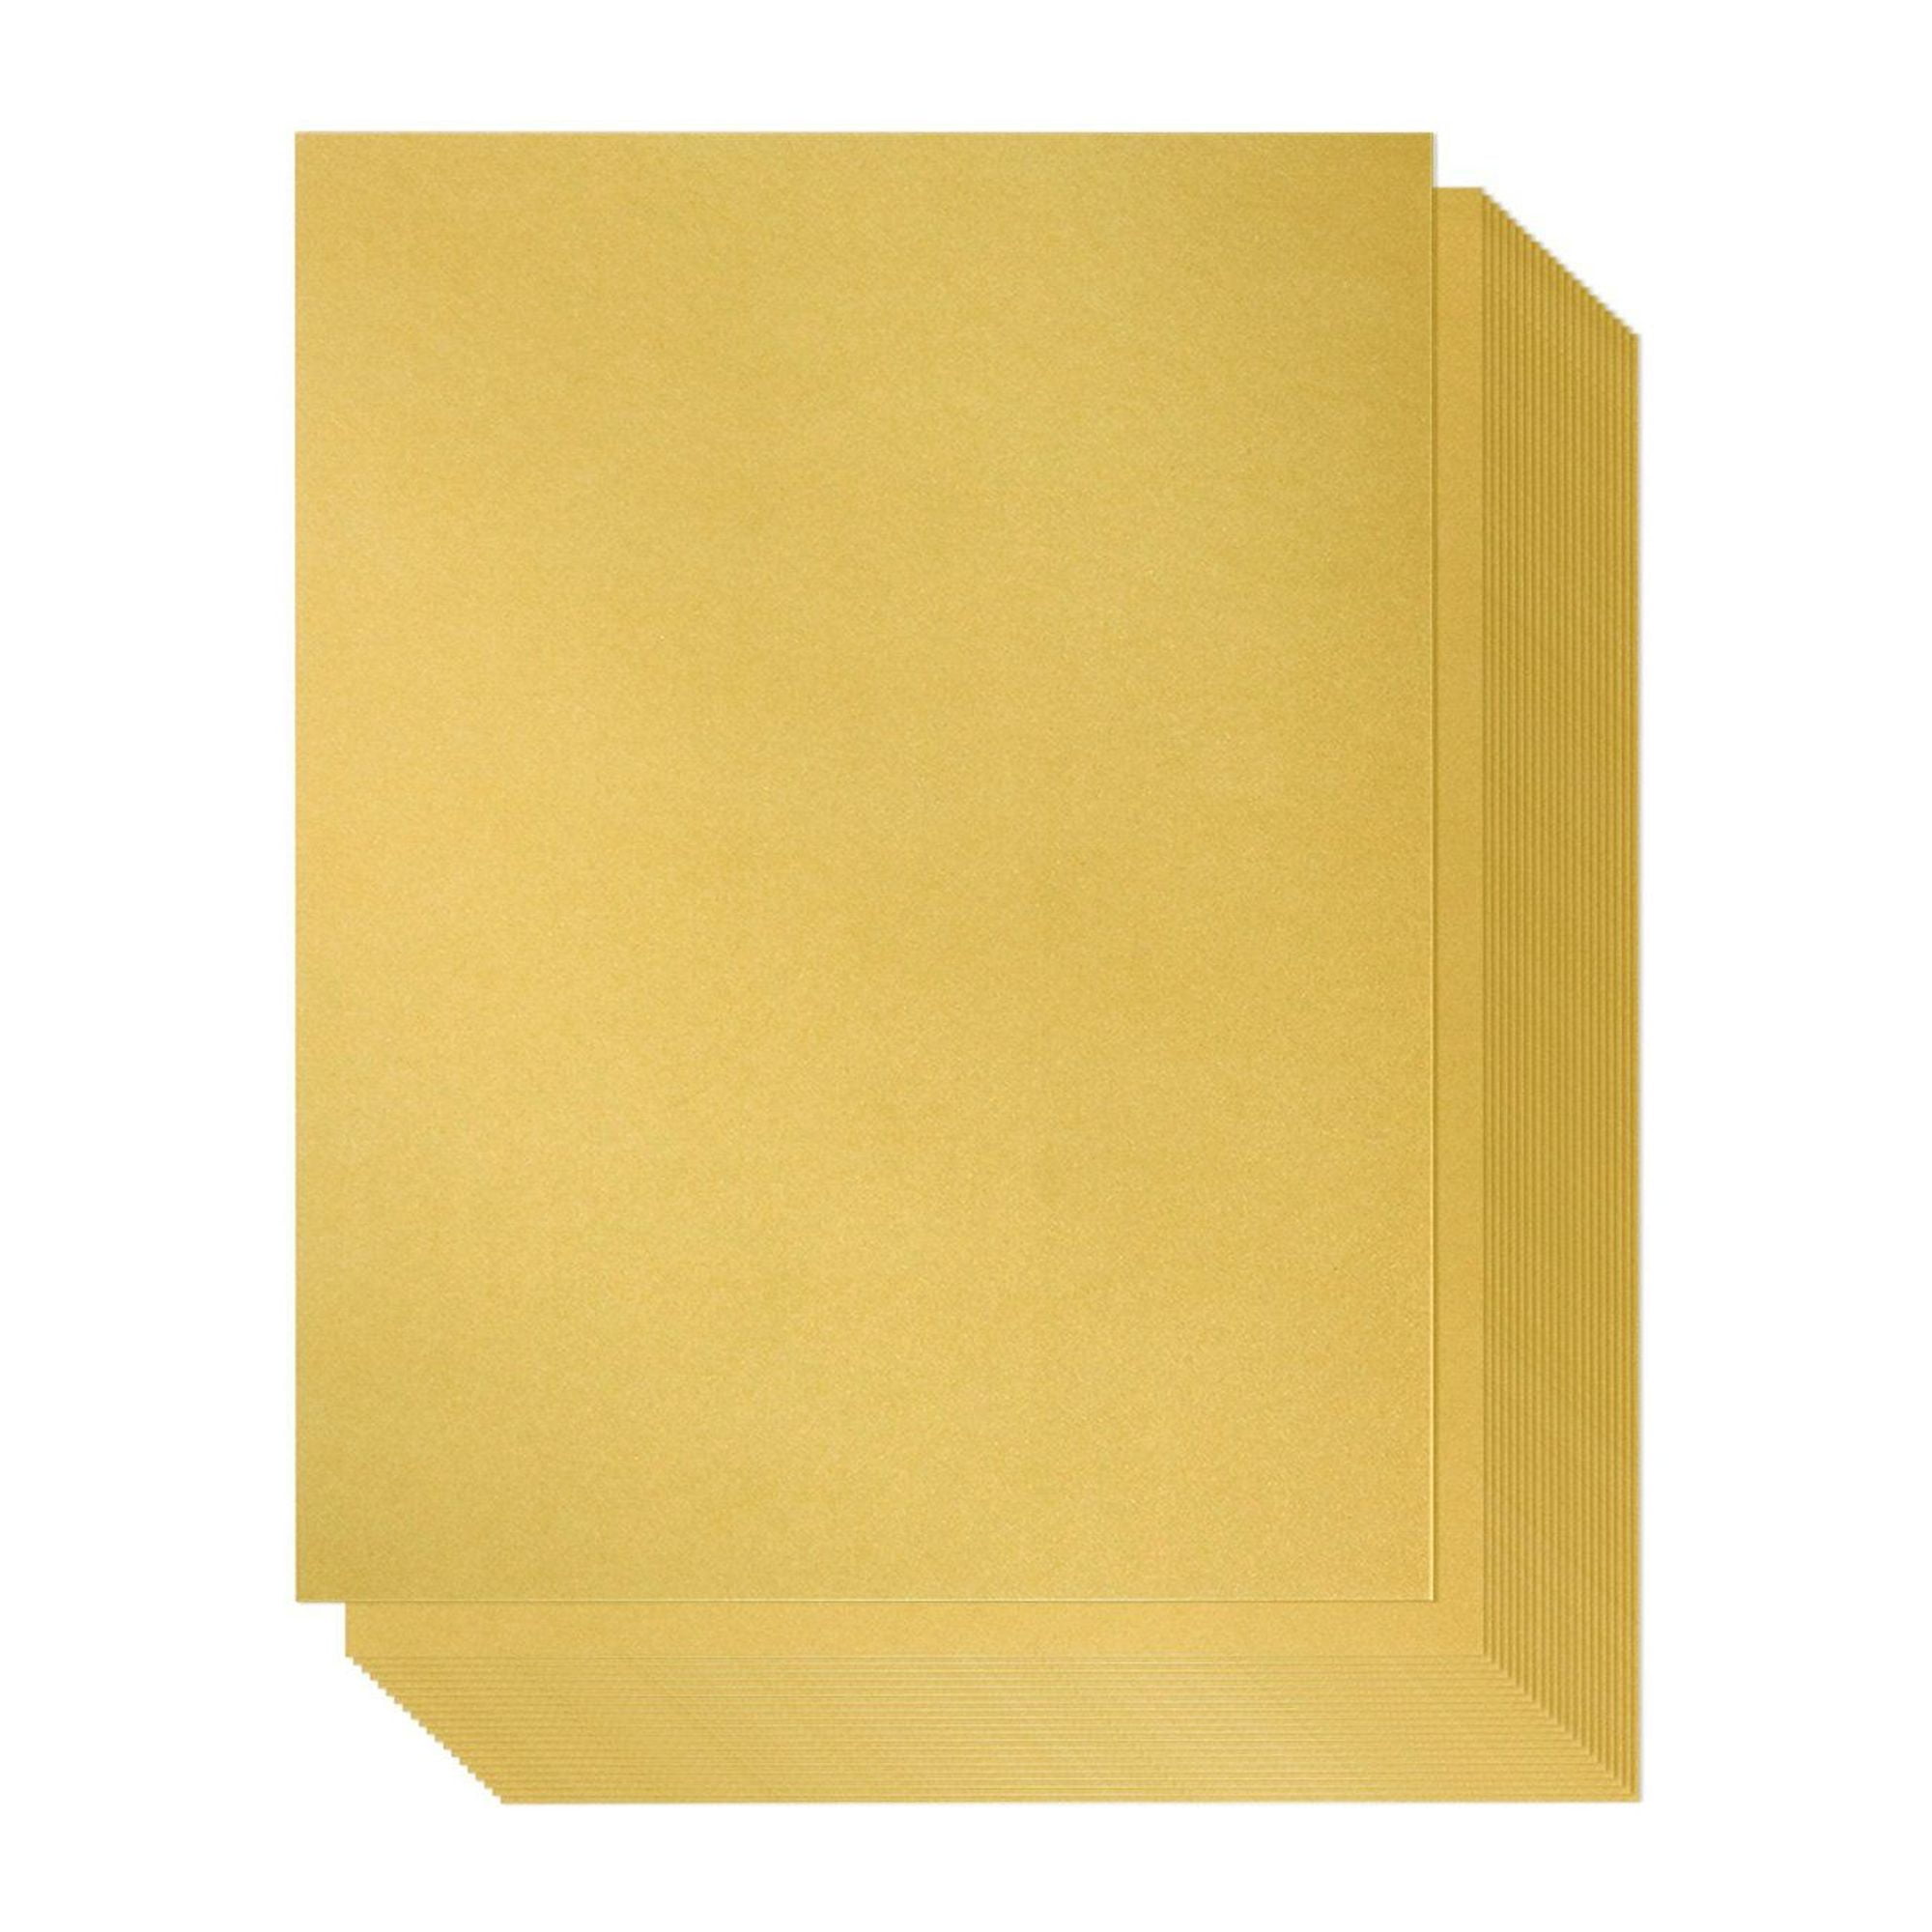 8.7 x 0.03 x 11 Inches Birthdays Perfect for Weddings Laser Printer Friendly Double Sided Letter Size Sheets Baby Showers 96 Pack-Gold Metallic Paper Shimmer Paper Craft Use